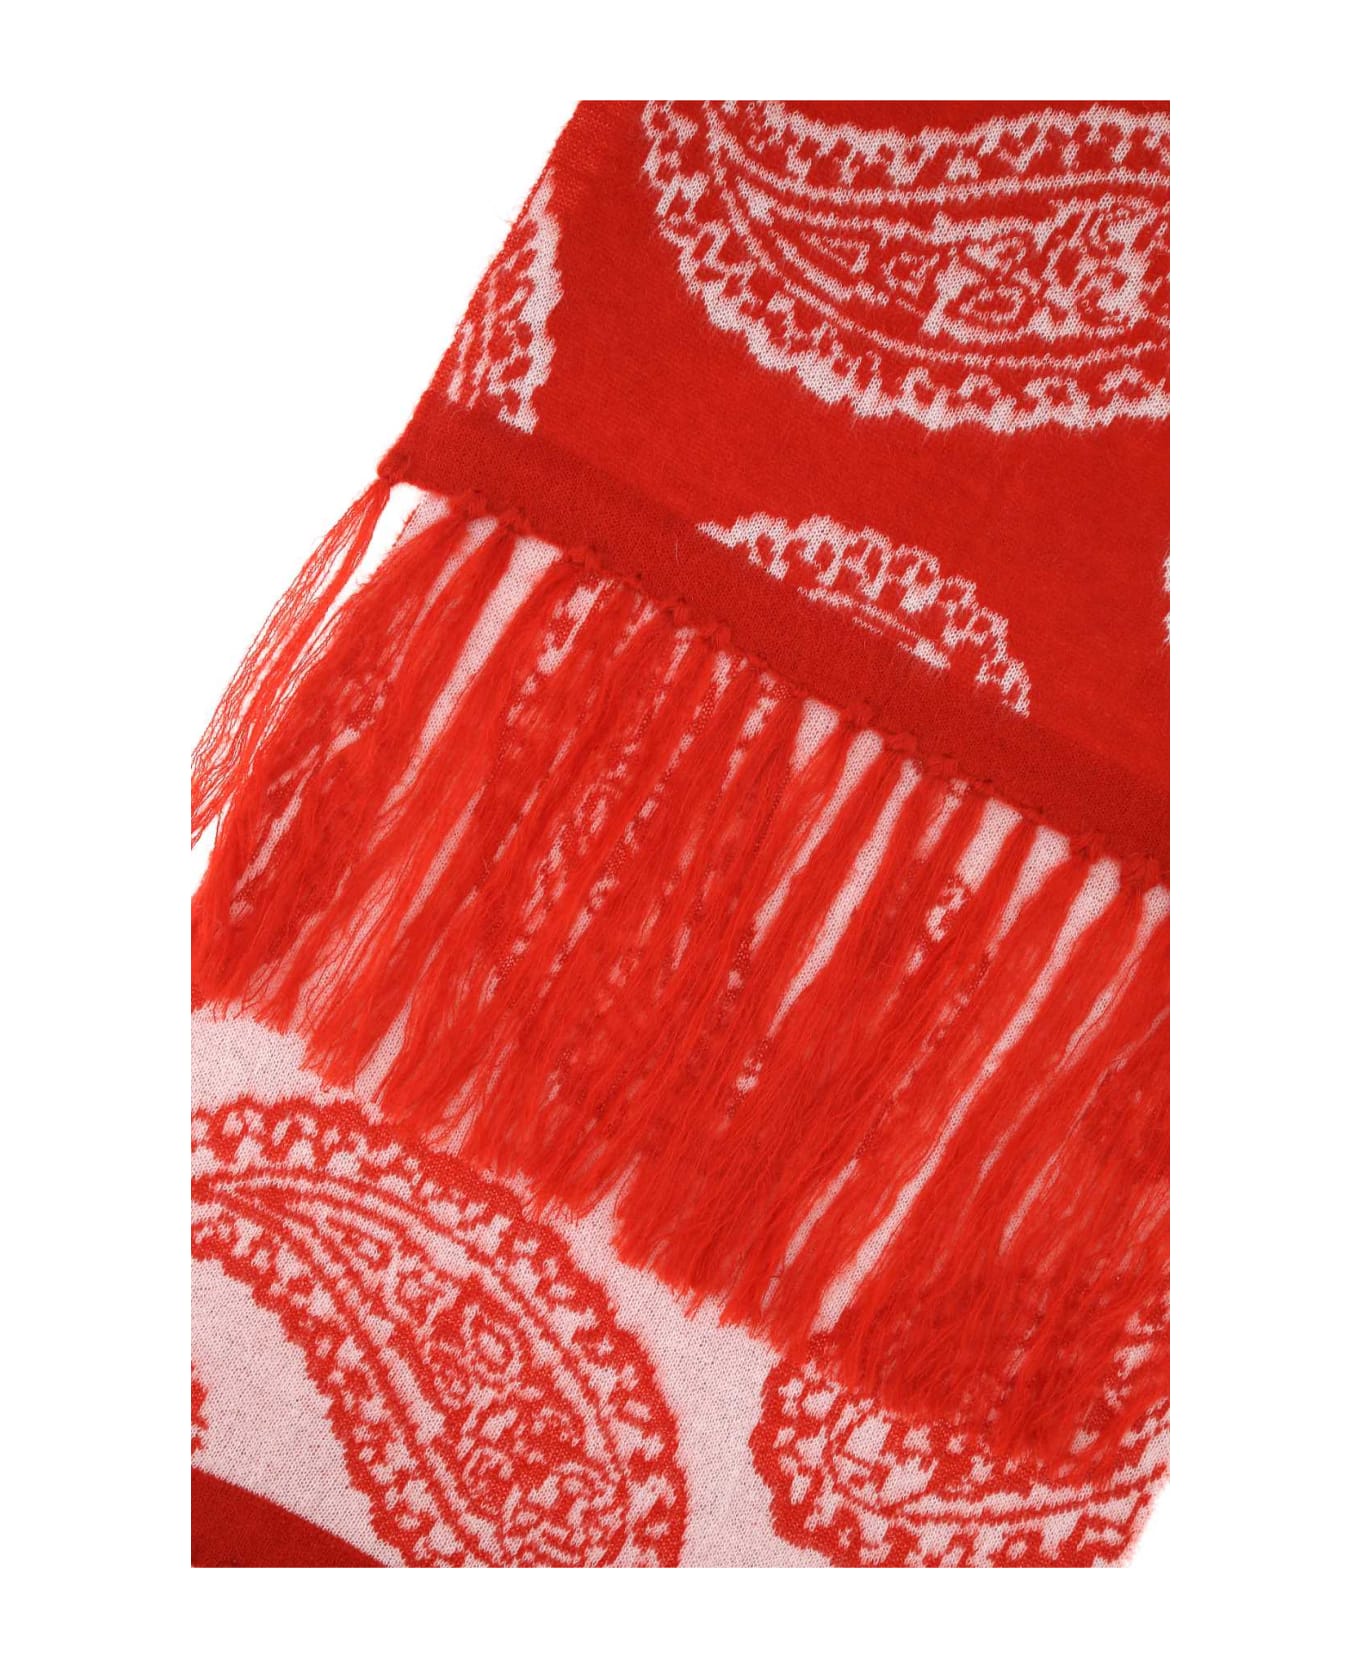 FourTwoFour on Fairfax Embroidered Acrylic Blend Scarf - 18